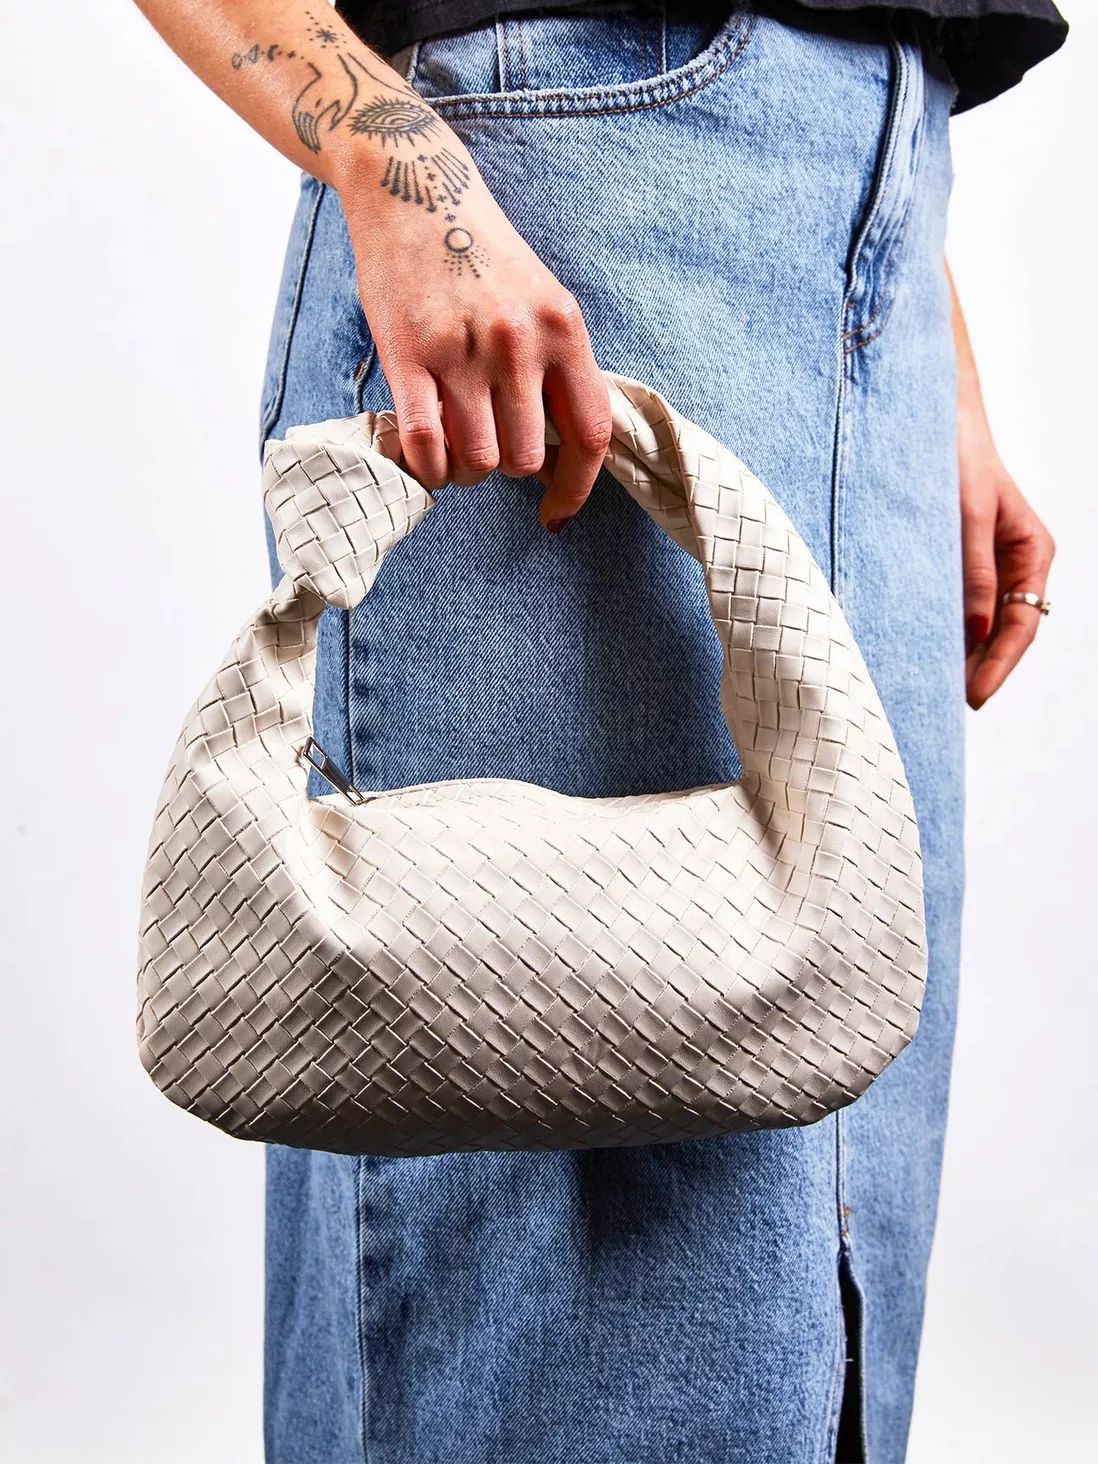 Woven PU Leather Grab bag with Knotted Strap Detail | Debenhams UK